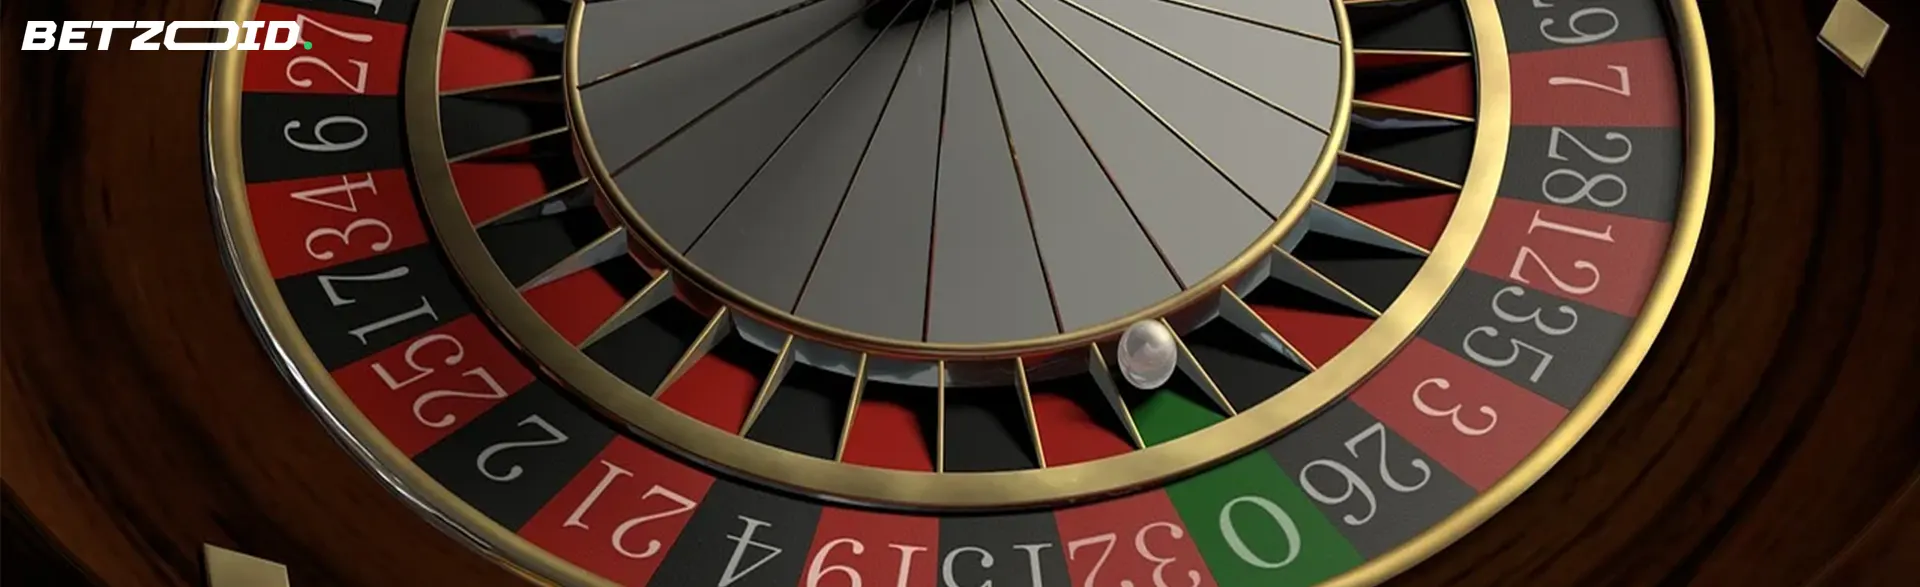 Roulette wheel during a casino game.